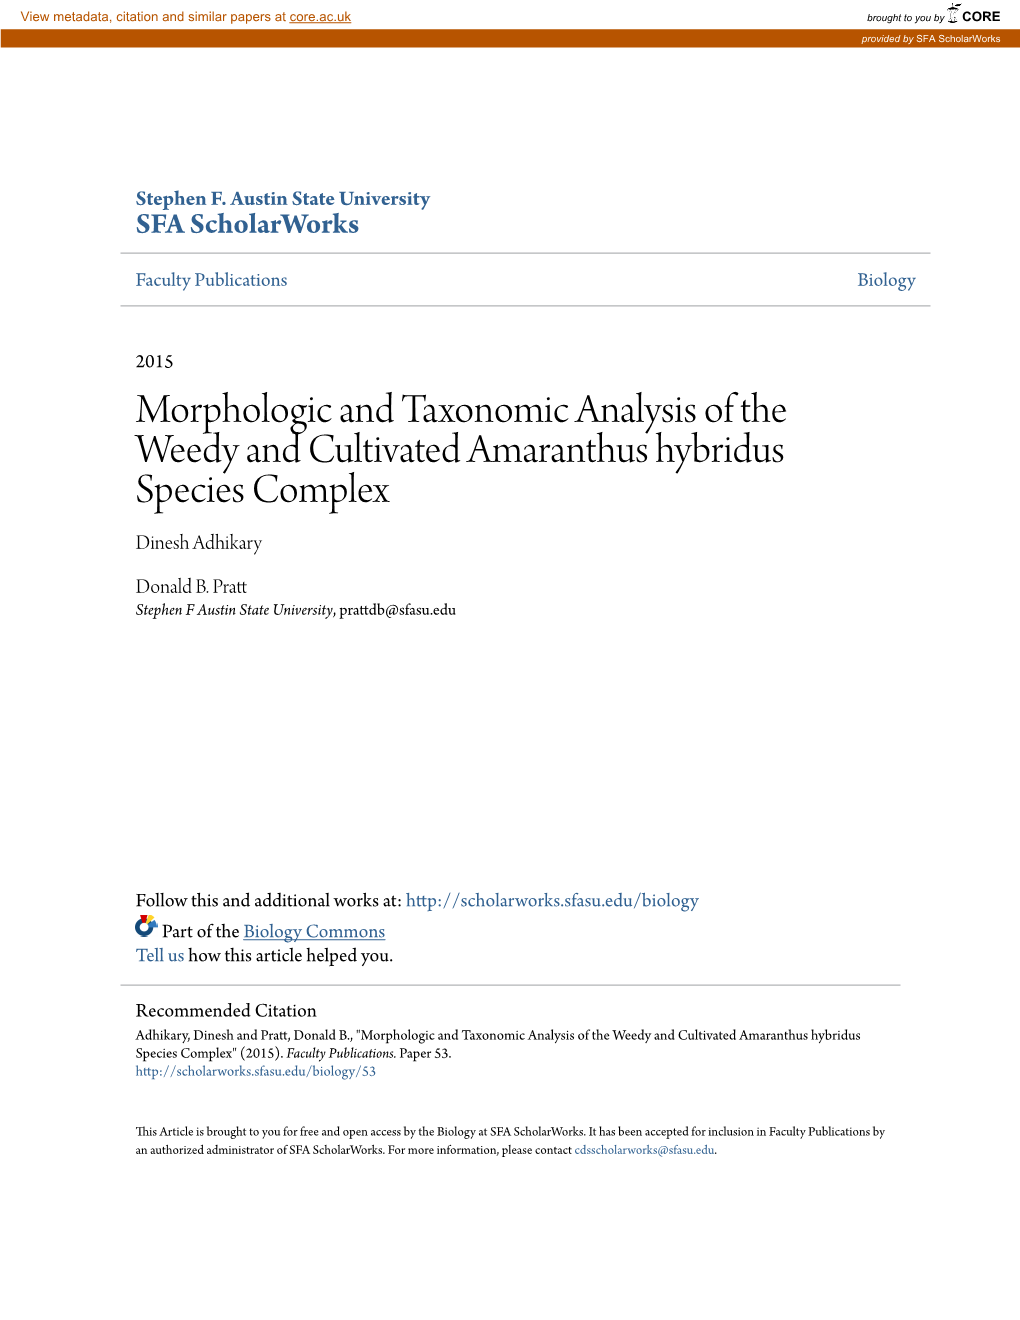 Morphologic and Taxonomic Analysis of the Weedy and Cultivated Amaranthus Hybridus Species Complex Dinesh Adhikary